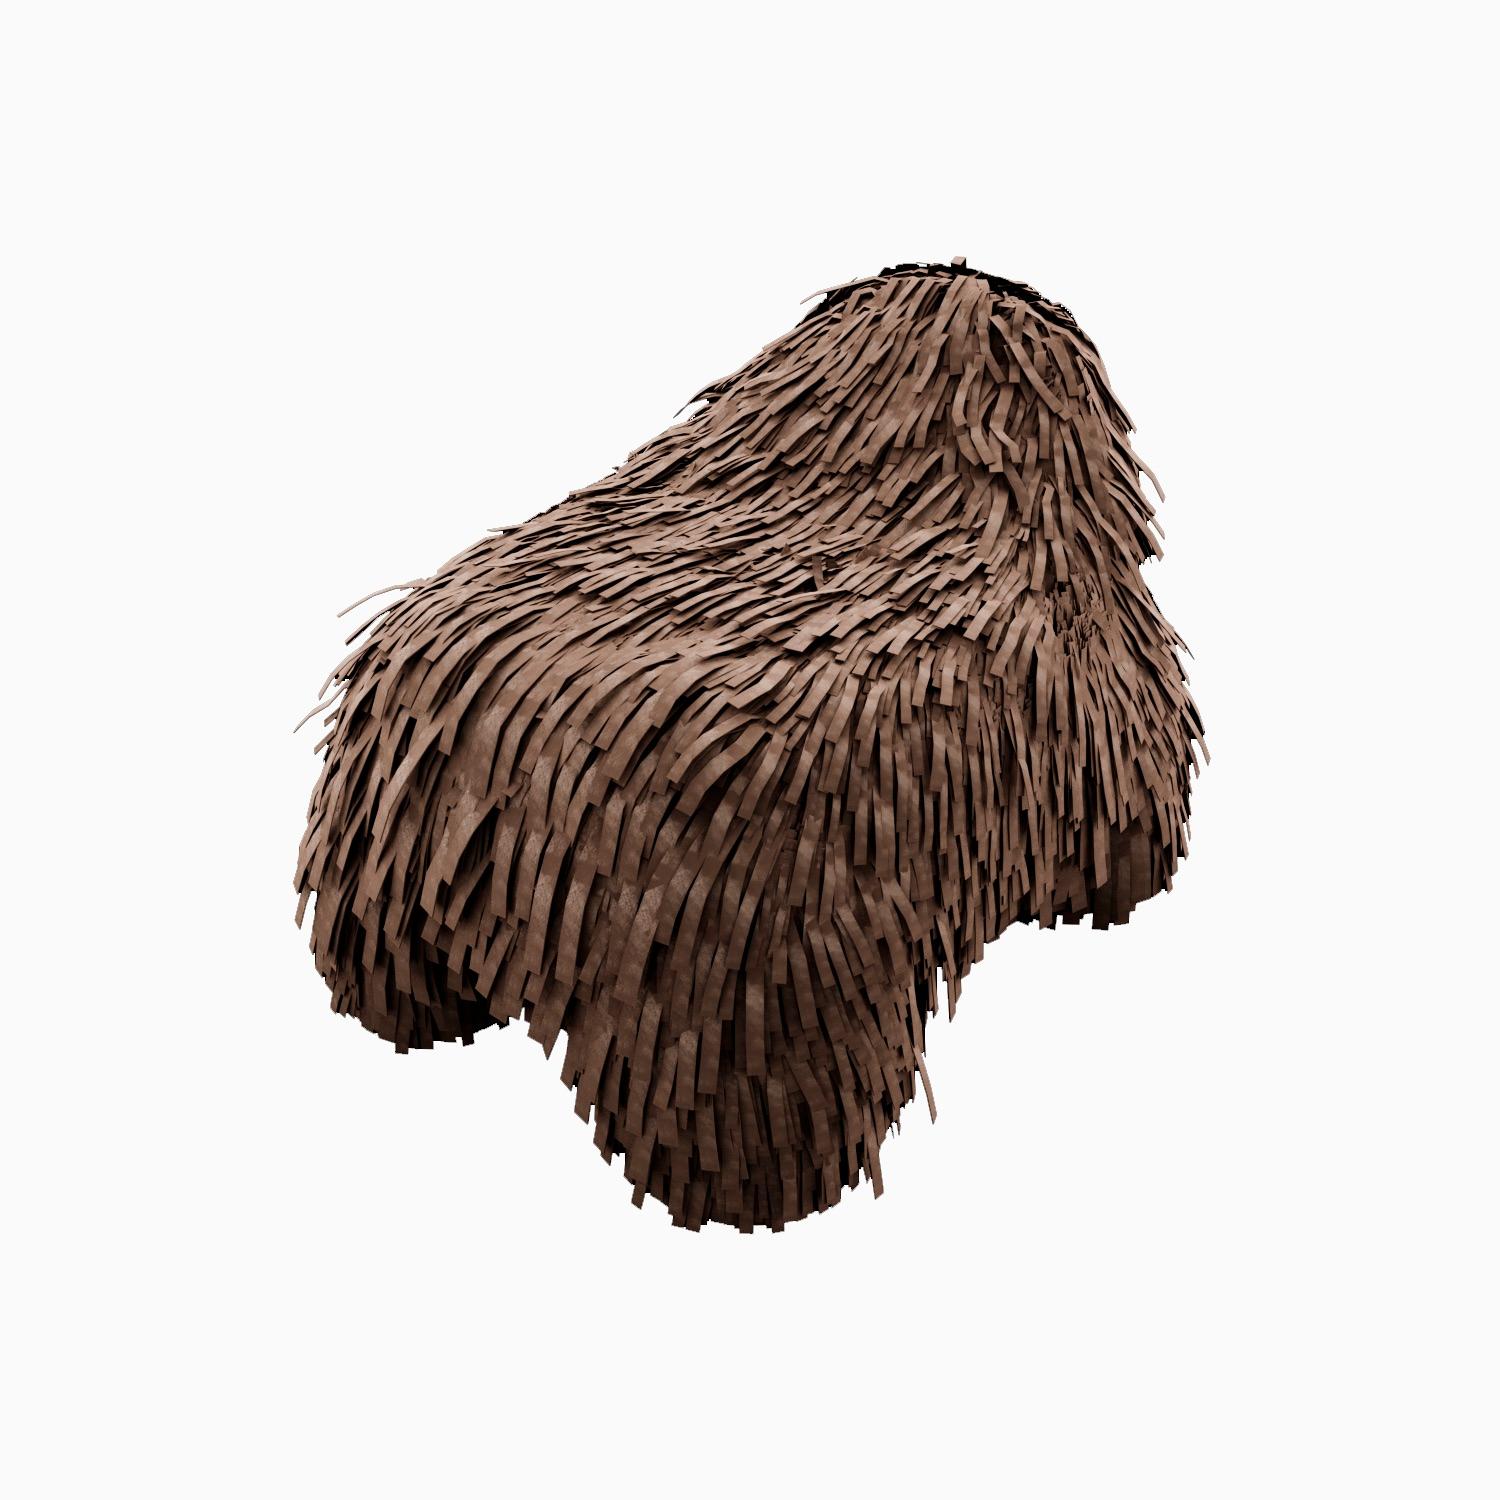 Puppy Pouffe brown is a hip little seat with luxurious shaggy suede. This cute piece of furniture is a delight around the house like a new pup

For his debut creations, Marcantonio introduced “Vegetal Animal”, a concept that evokes strong emotions